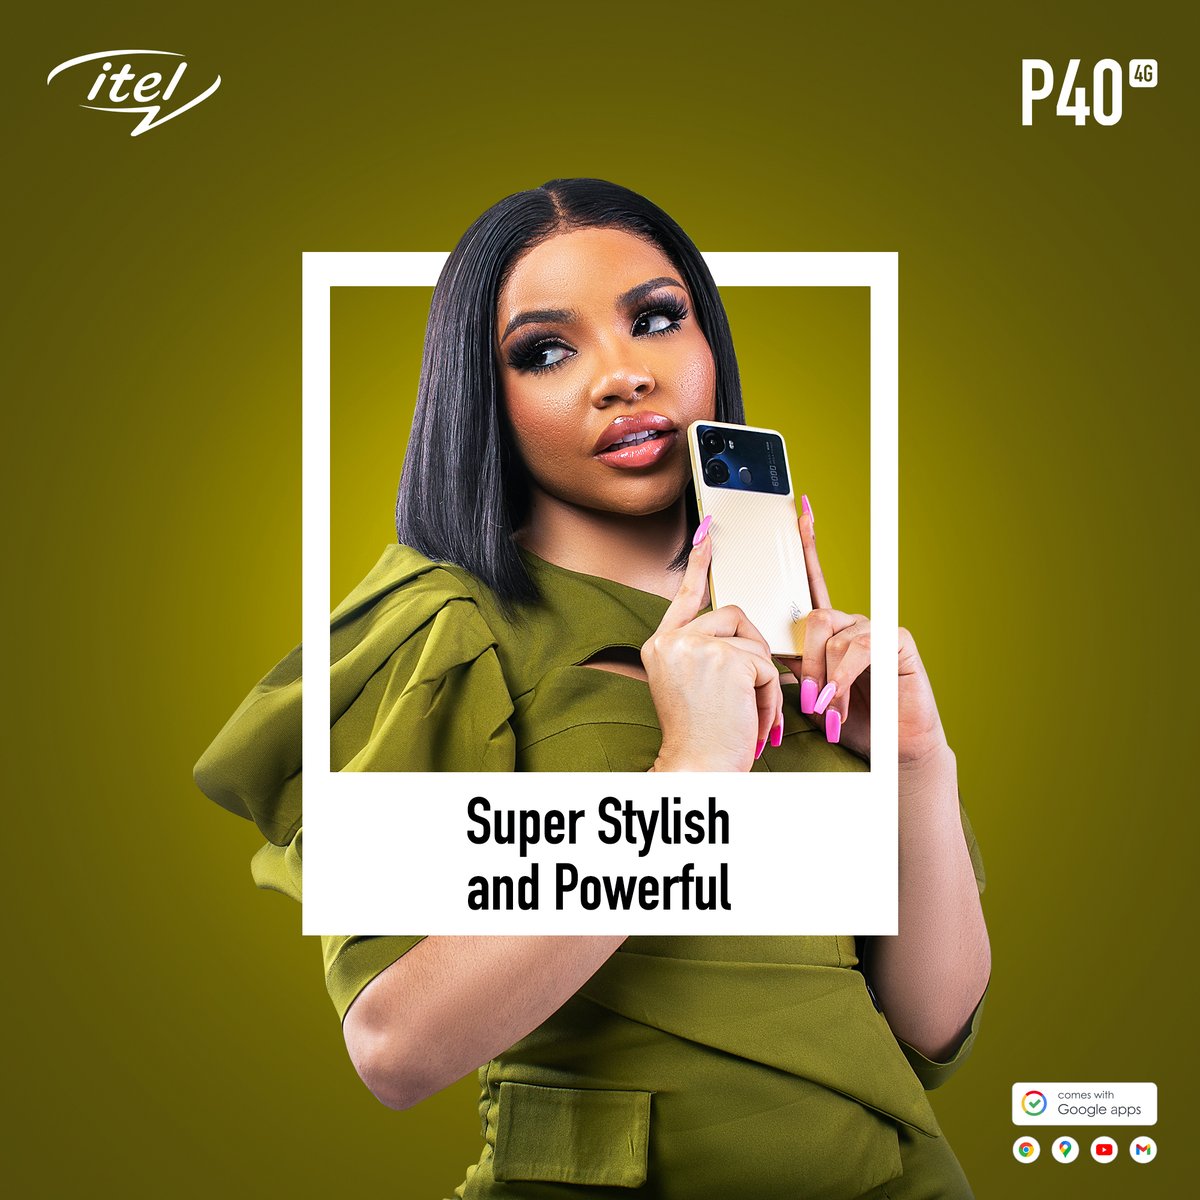 Slimness meets sophistication! With a sleek 8.7mm profile, the itel P40 fits perfectly in your hand and adds a touch of elegance to your style. ✨

Be like @nengiofficial, get the itel P40 today!

#itelP40
#1ChargeFor3Days